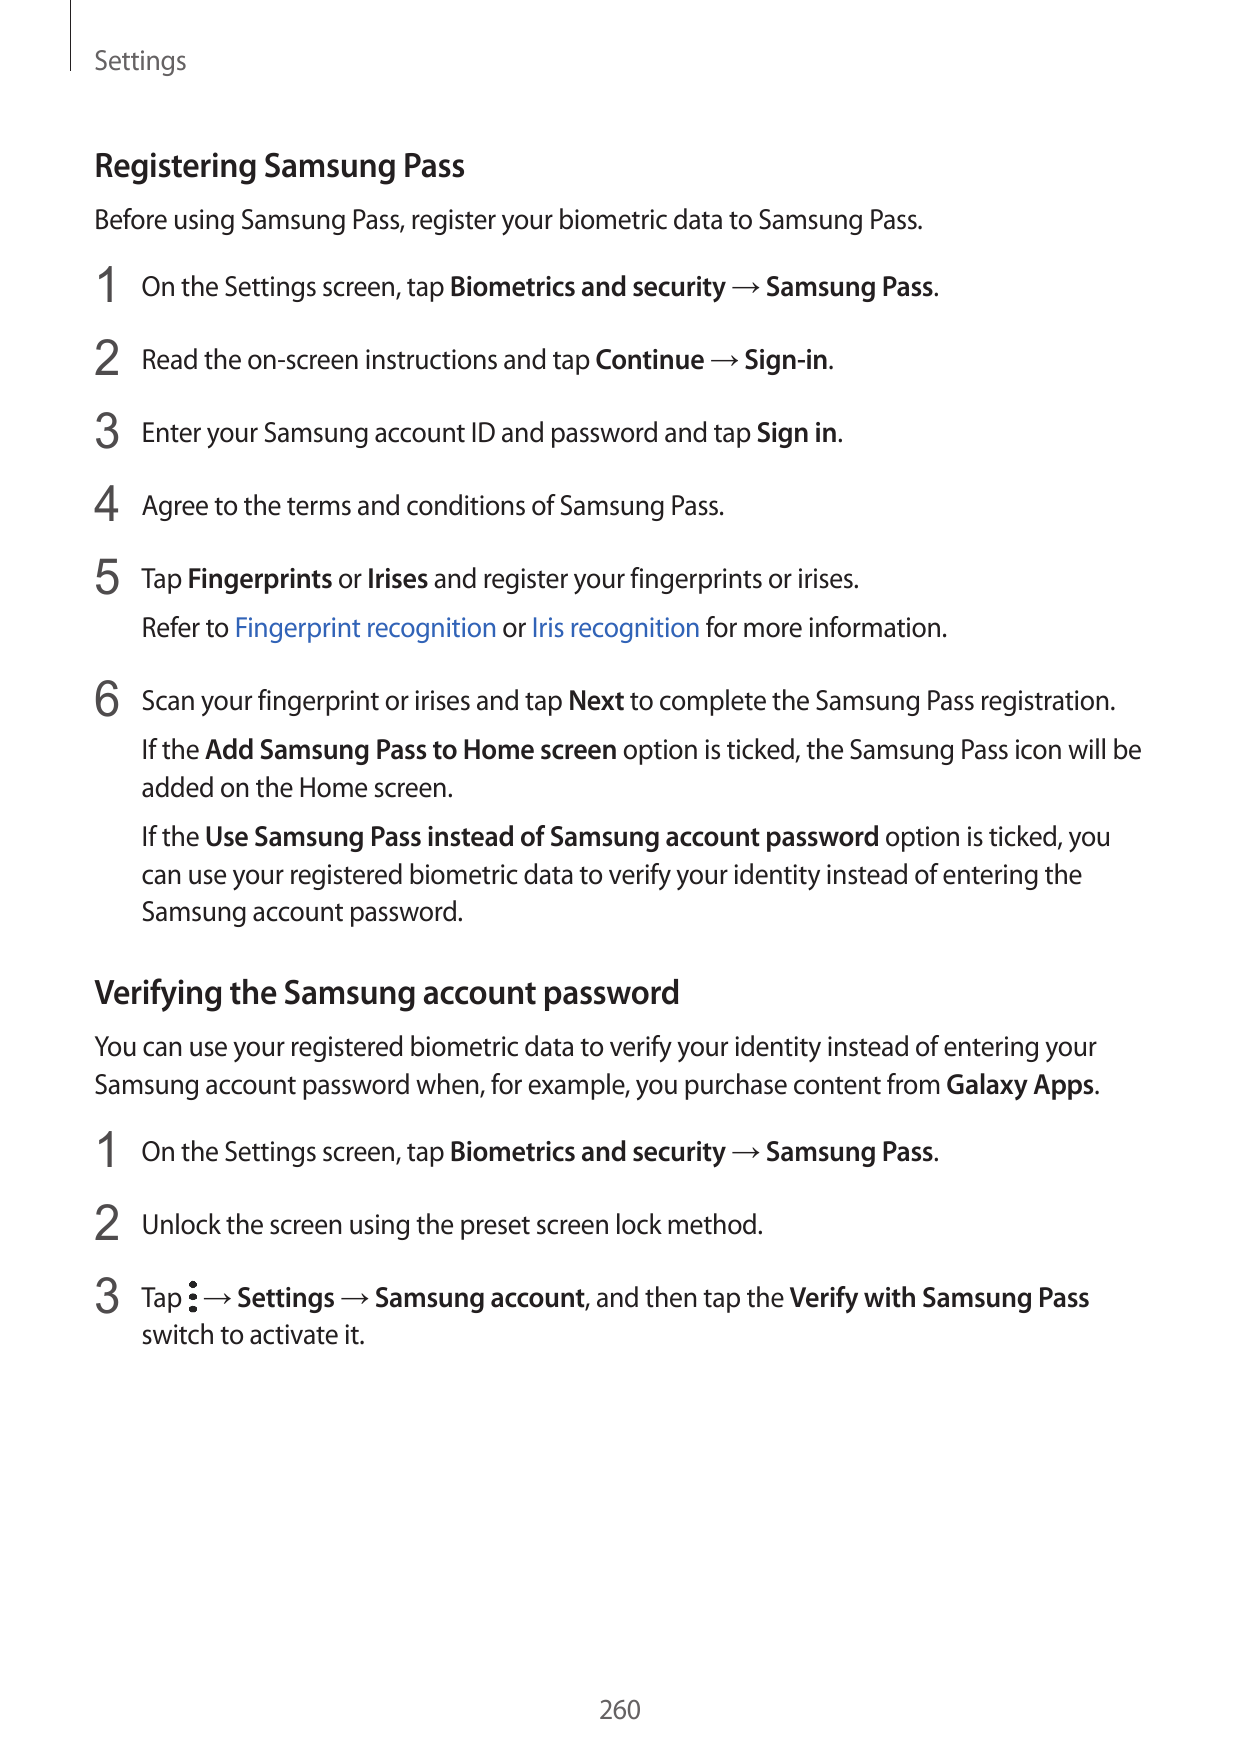 SettingsRegistering Samsung PassBefore using Samsung Pass, register your biometric data to Samsung Pass.1 On the Settings screen